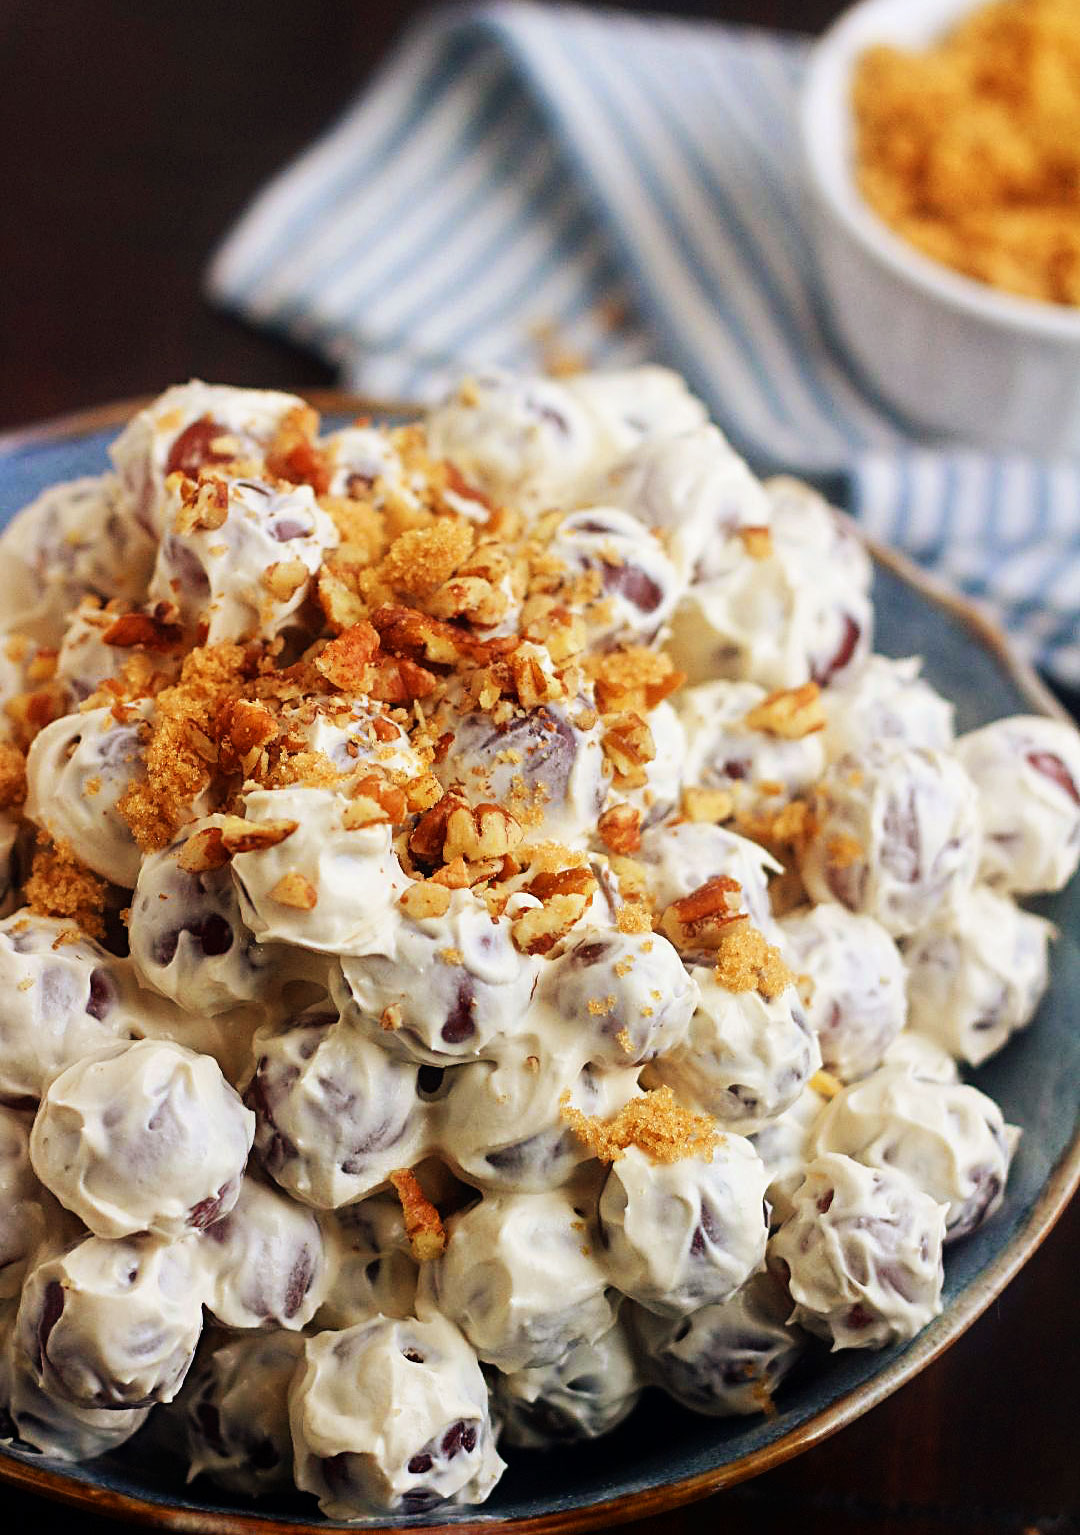 Grape Salad is full of fresh, sweet grapes, tossed in a sweet cream cheese dressing, then sprinkled with brown sugar and pecans. Life-in-the-Lofthouse.com